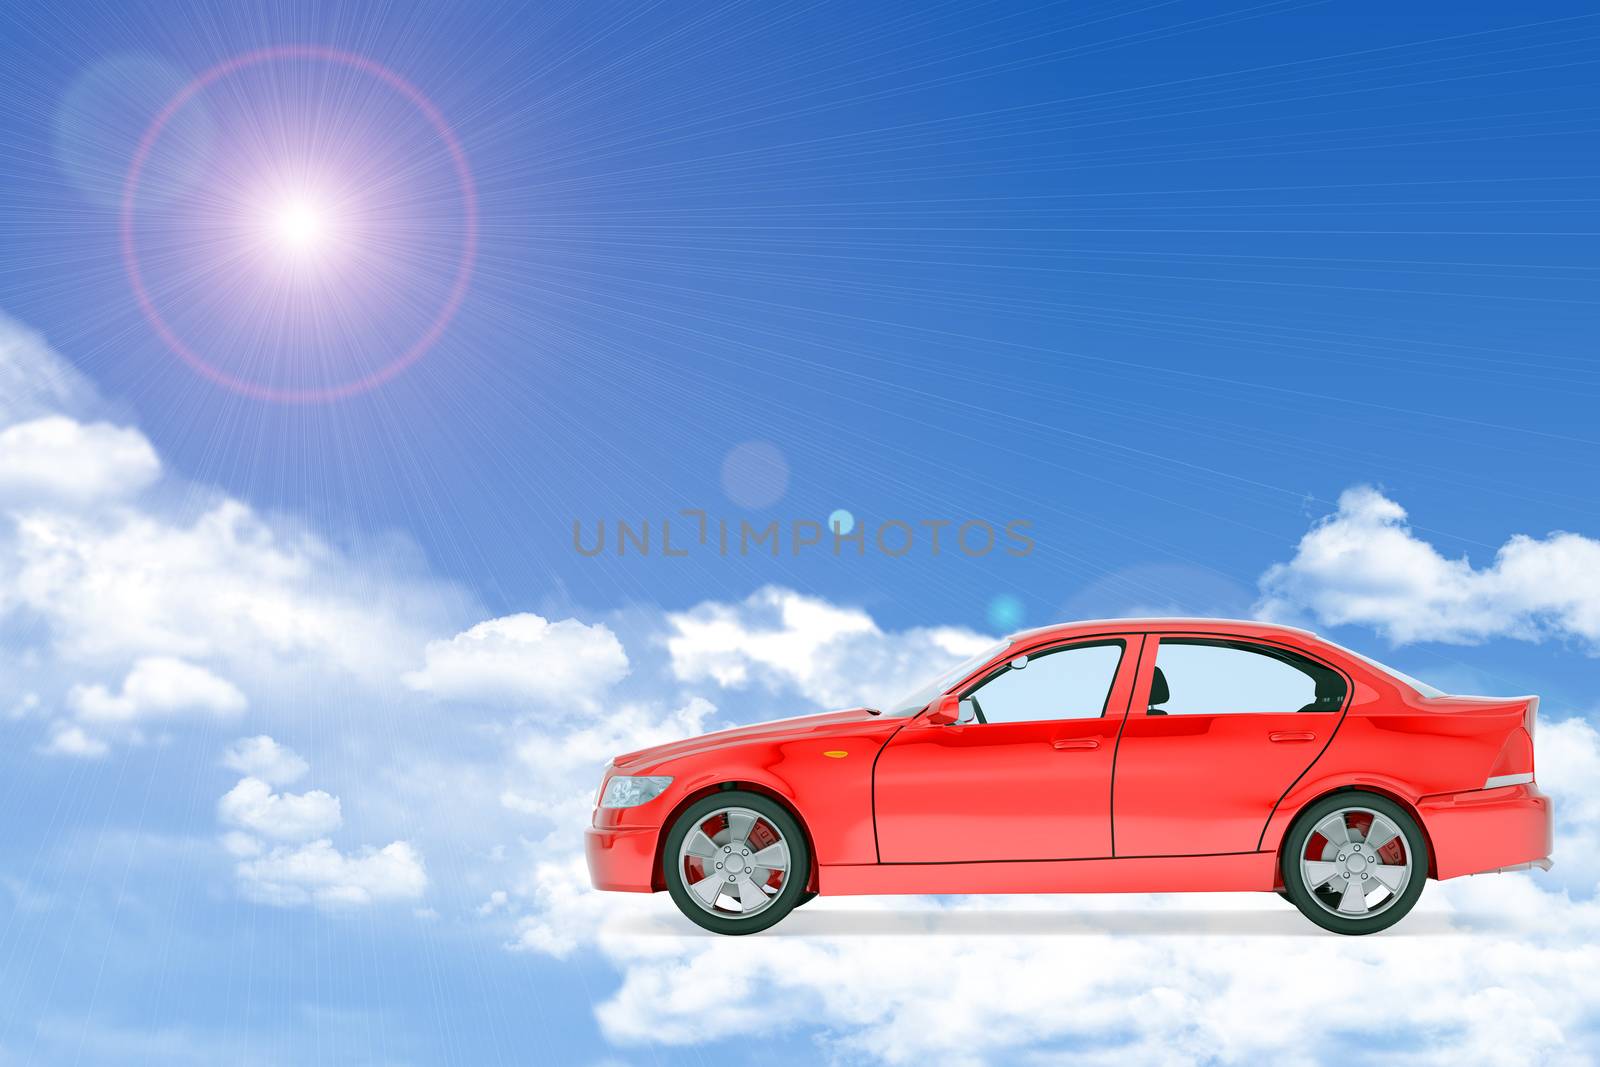 Red car on blue sky background with clouds